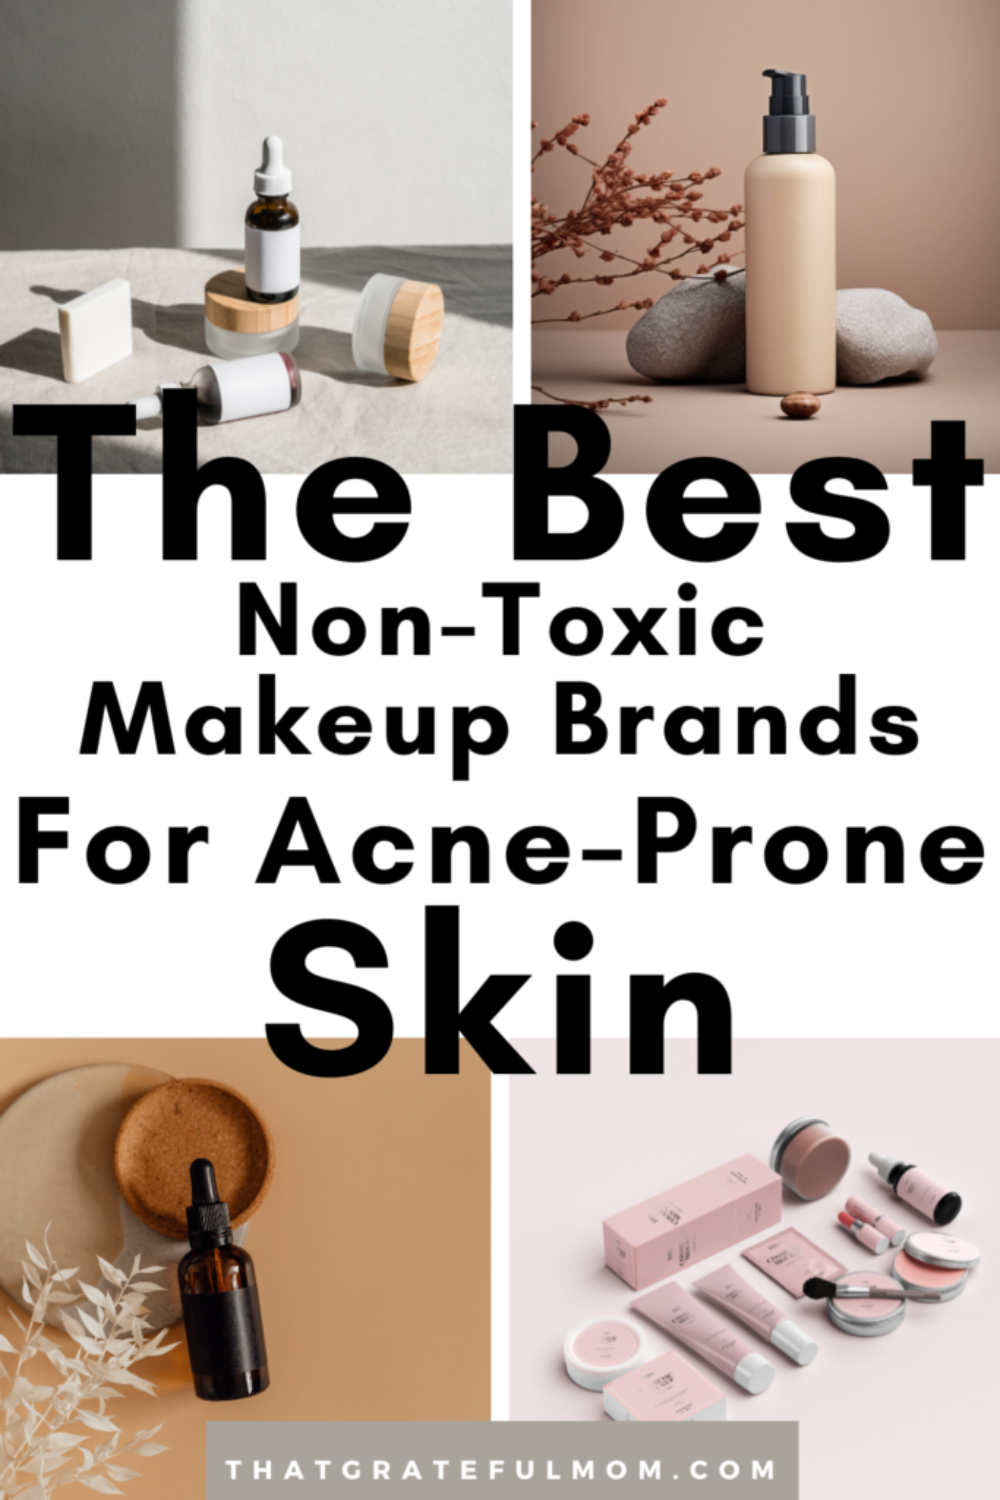 The Best Non-Comedogenic Makeup for Acne-Prone Skin pin 1